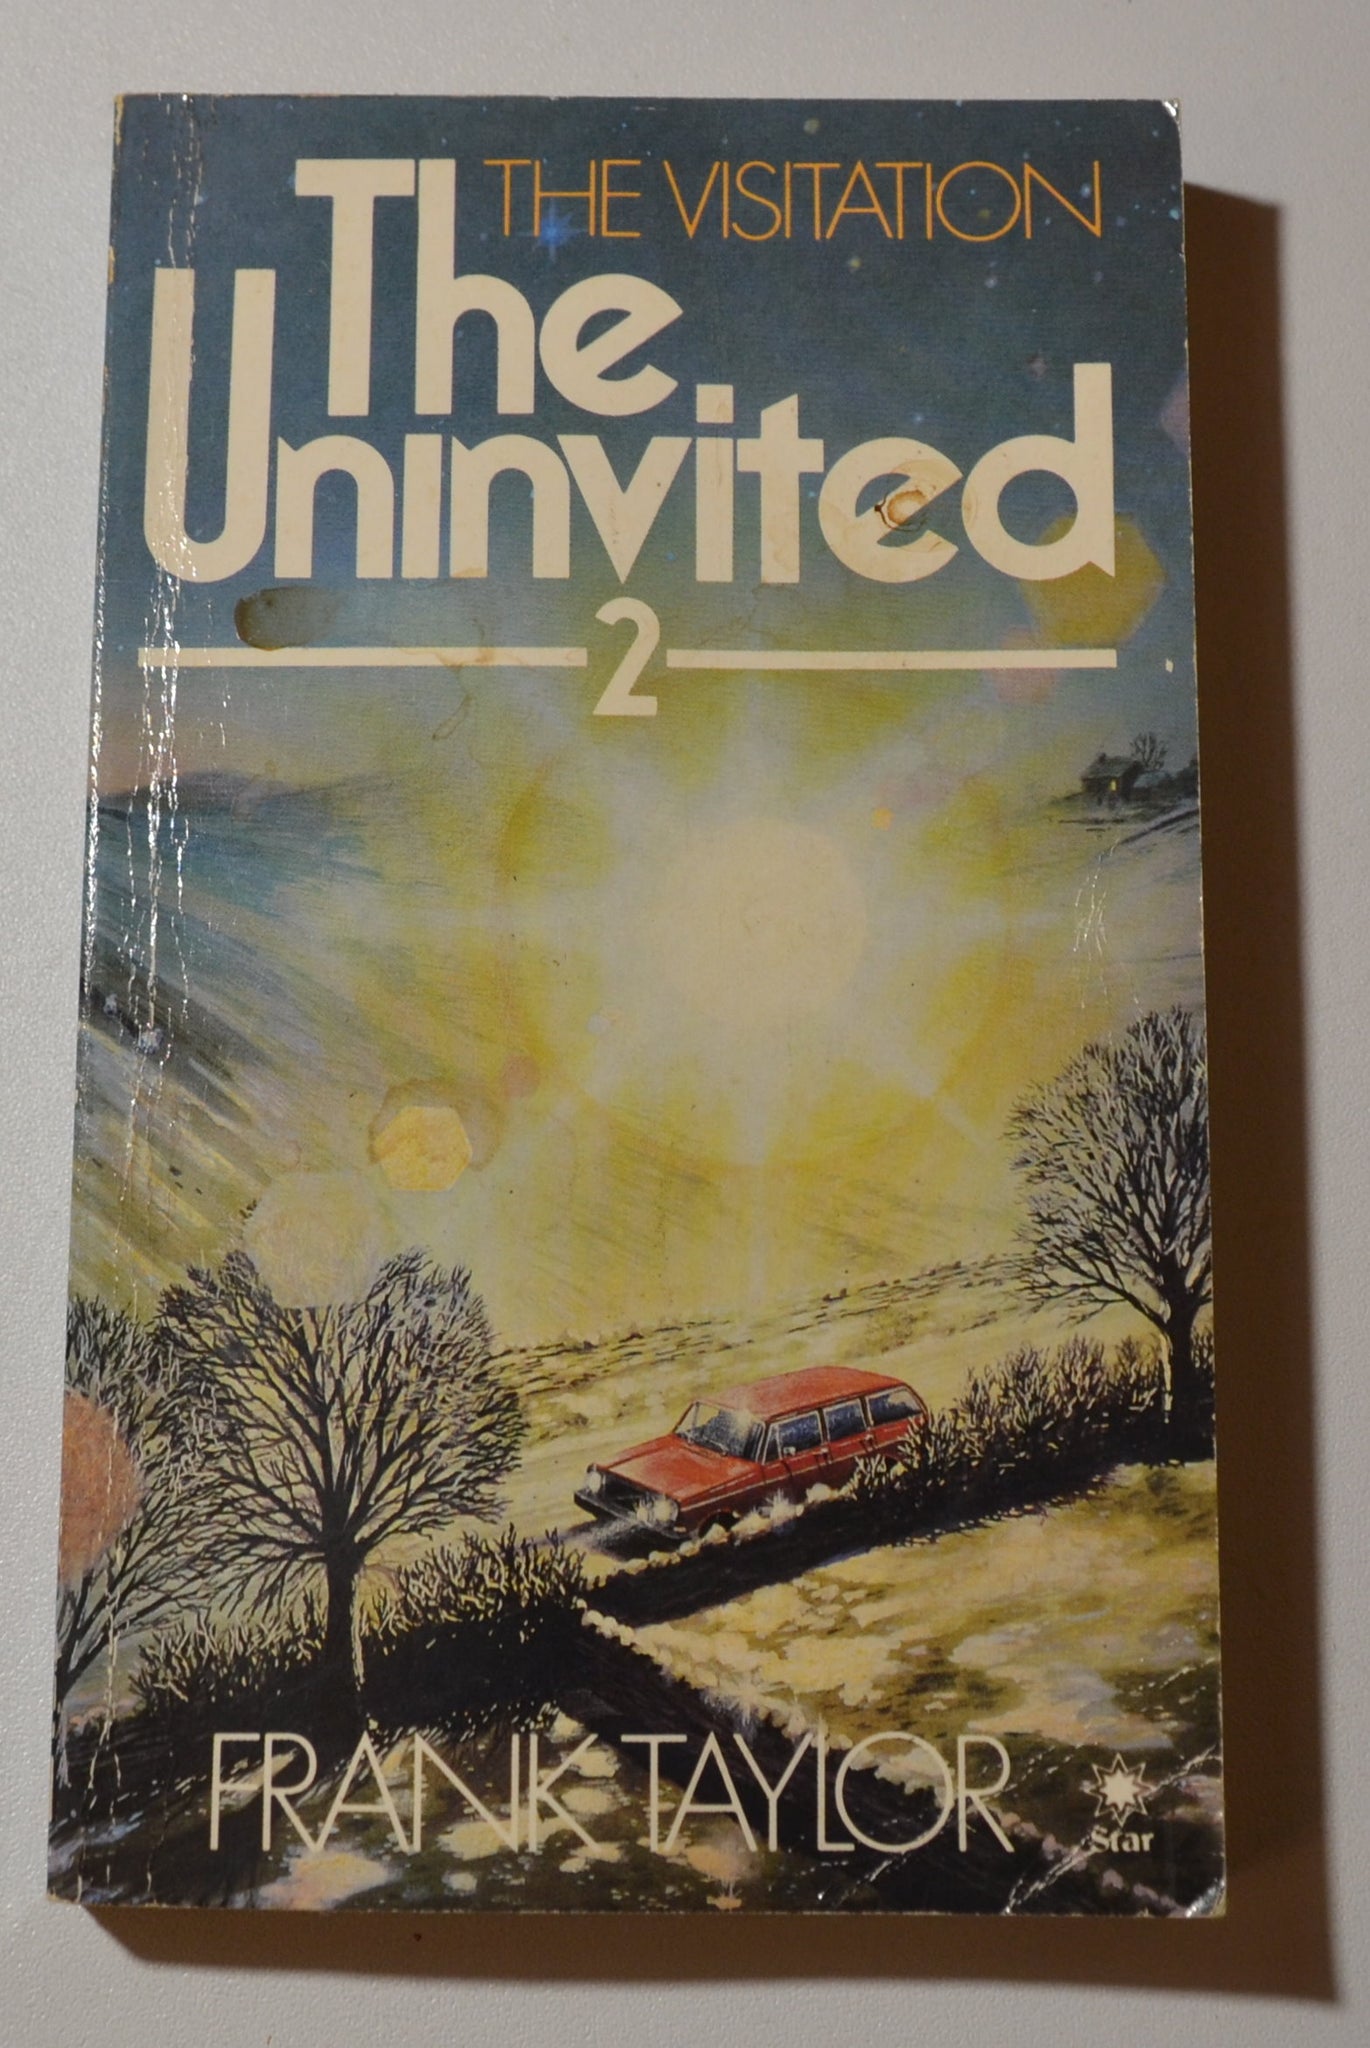 The Visitation - The Uninvited 2